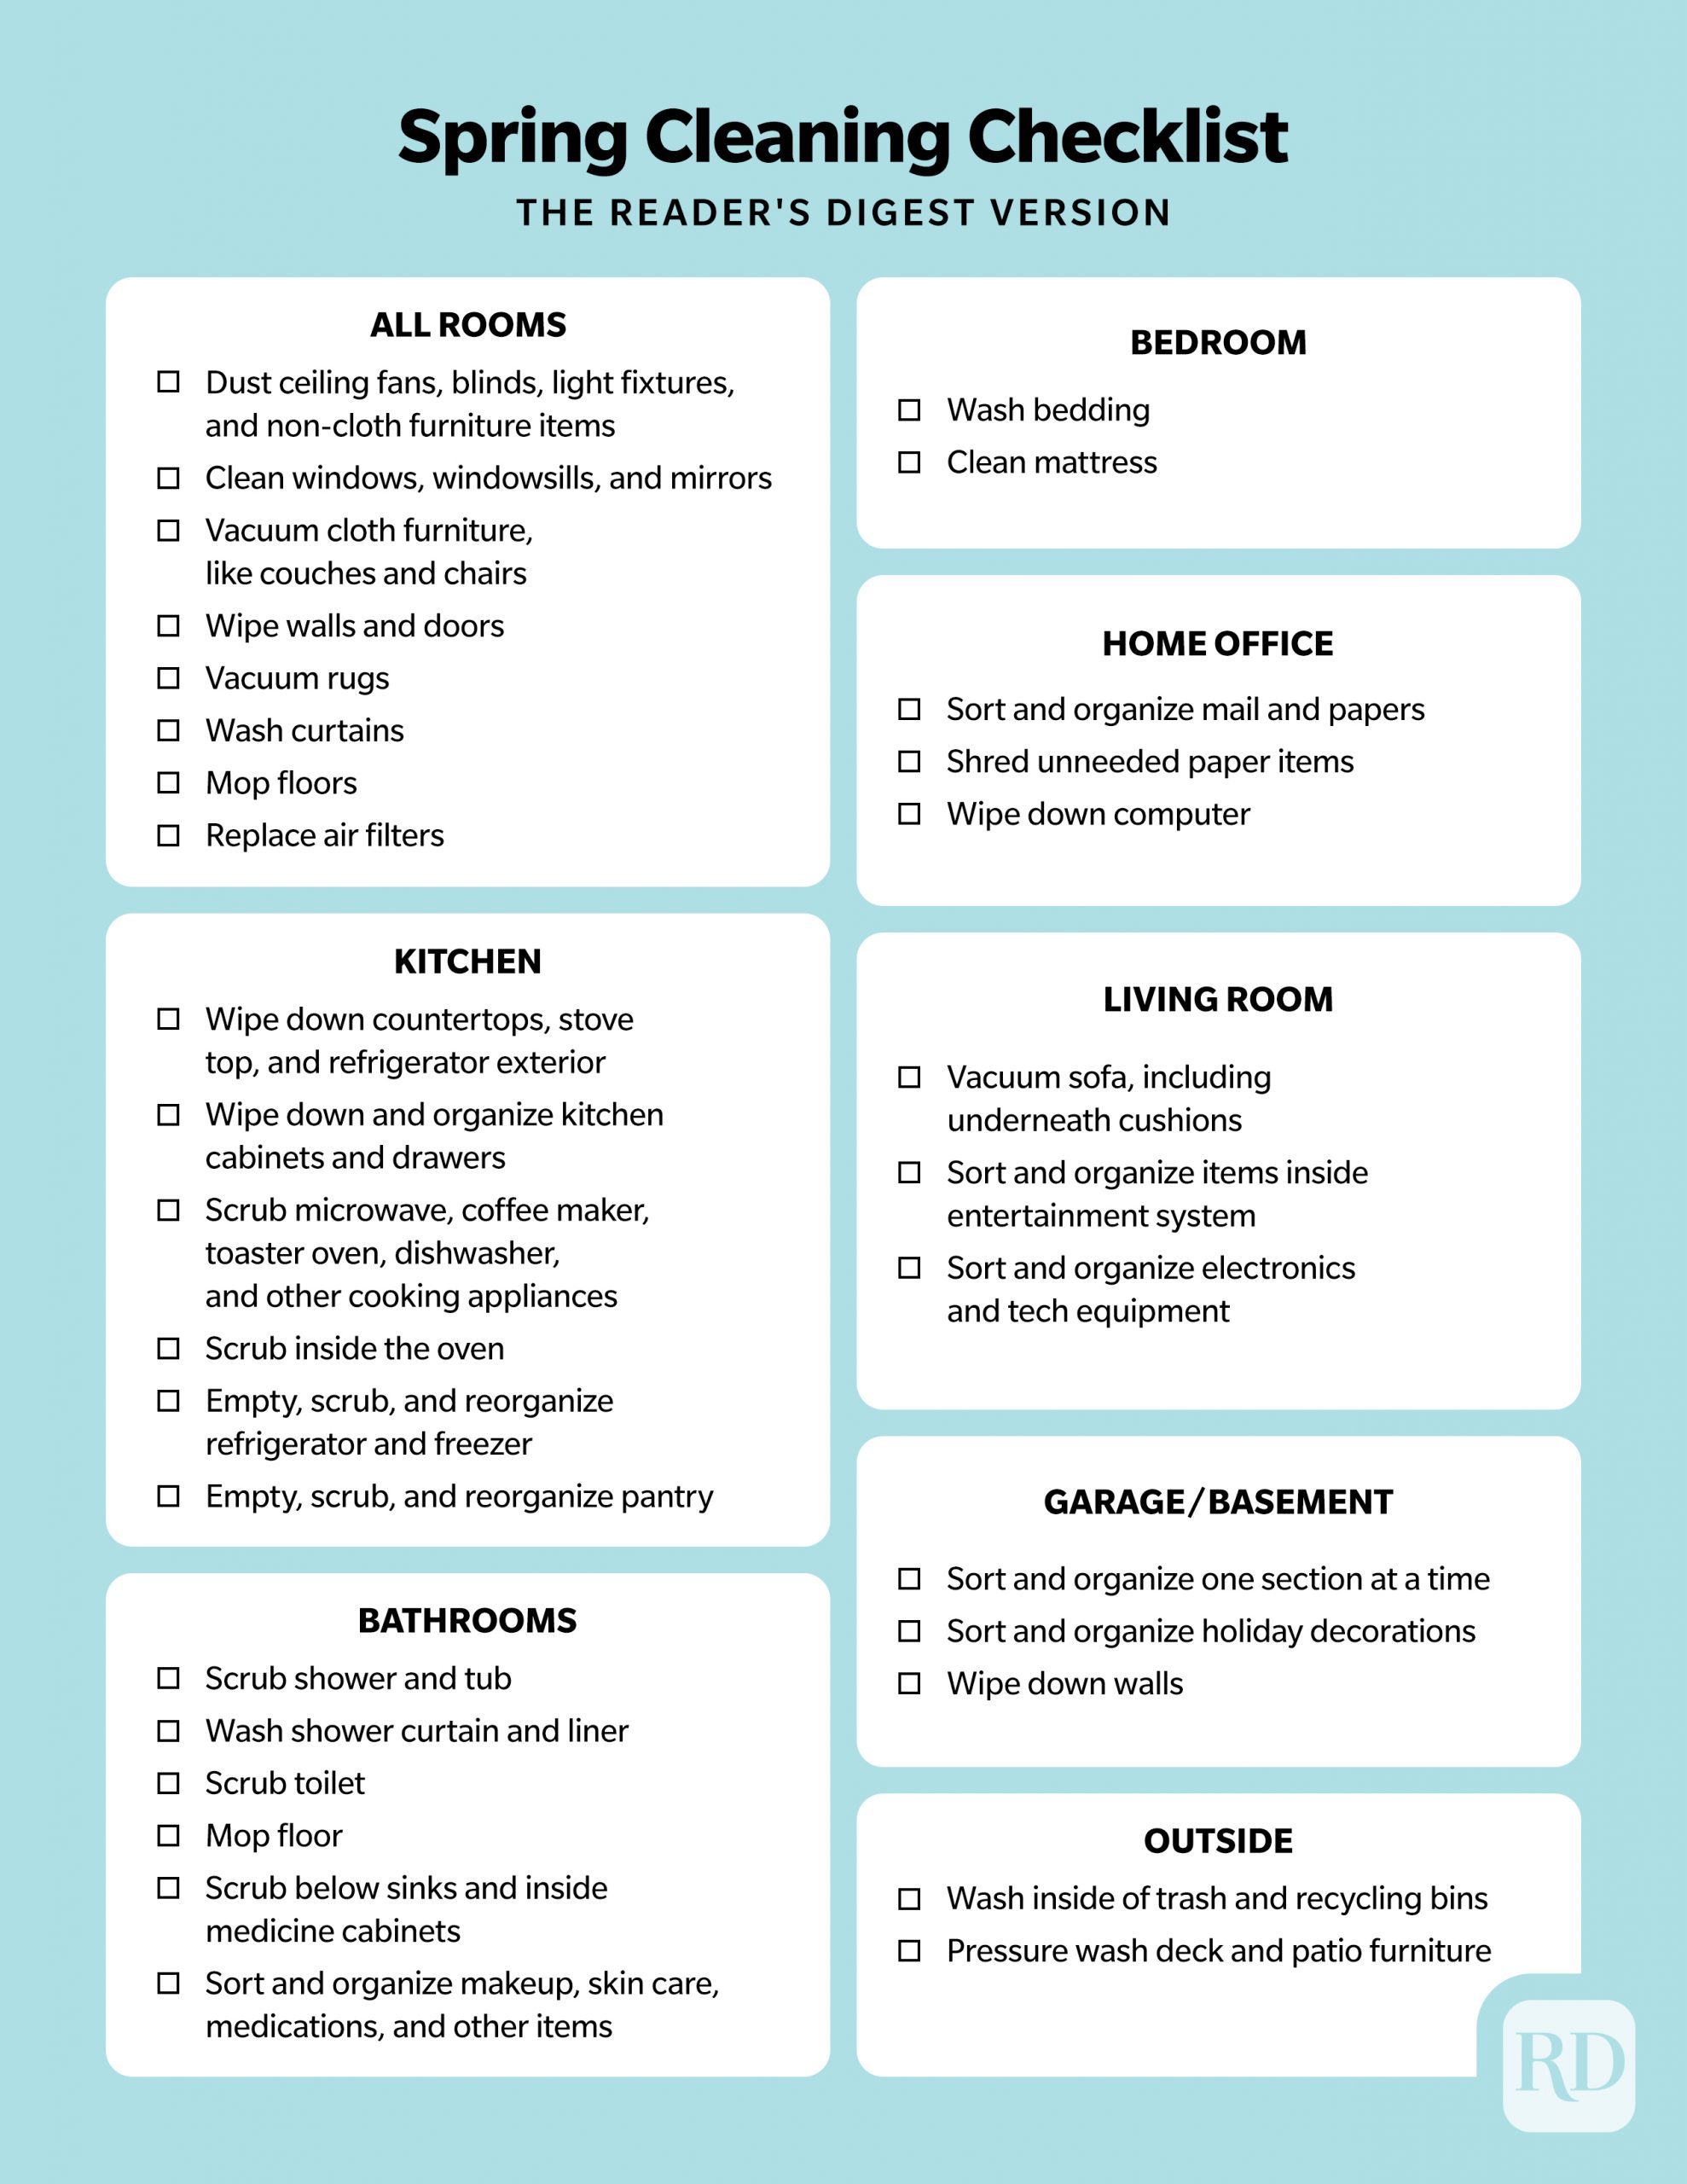 50 Best Spring Cleaning Tips - Quick & Easy House Cleaning Ideas